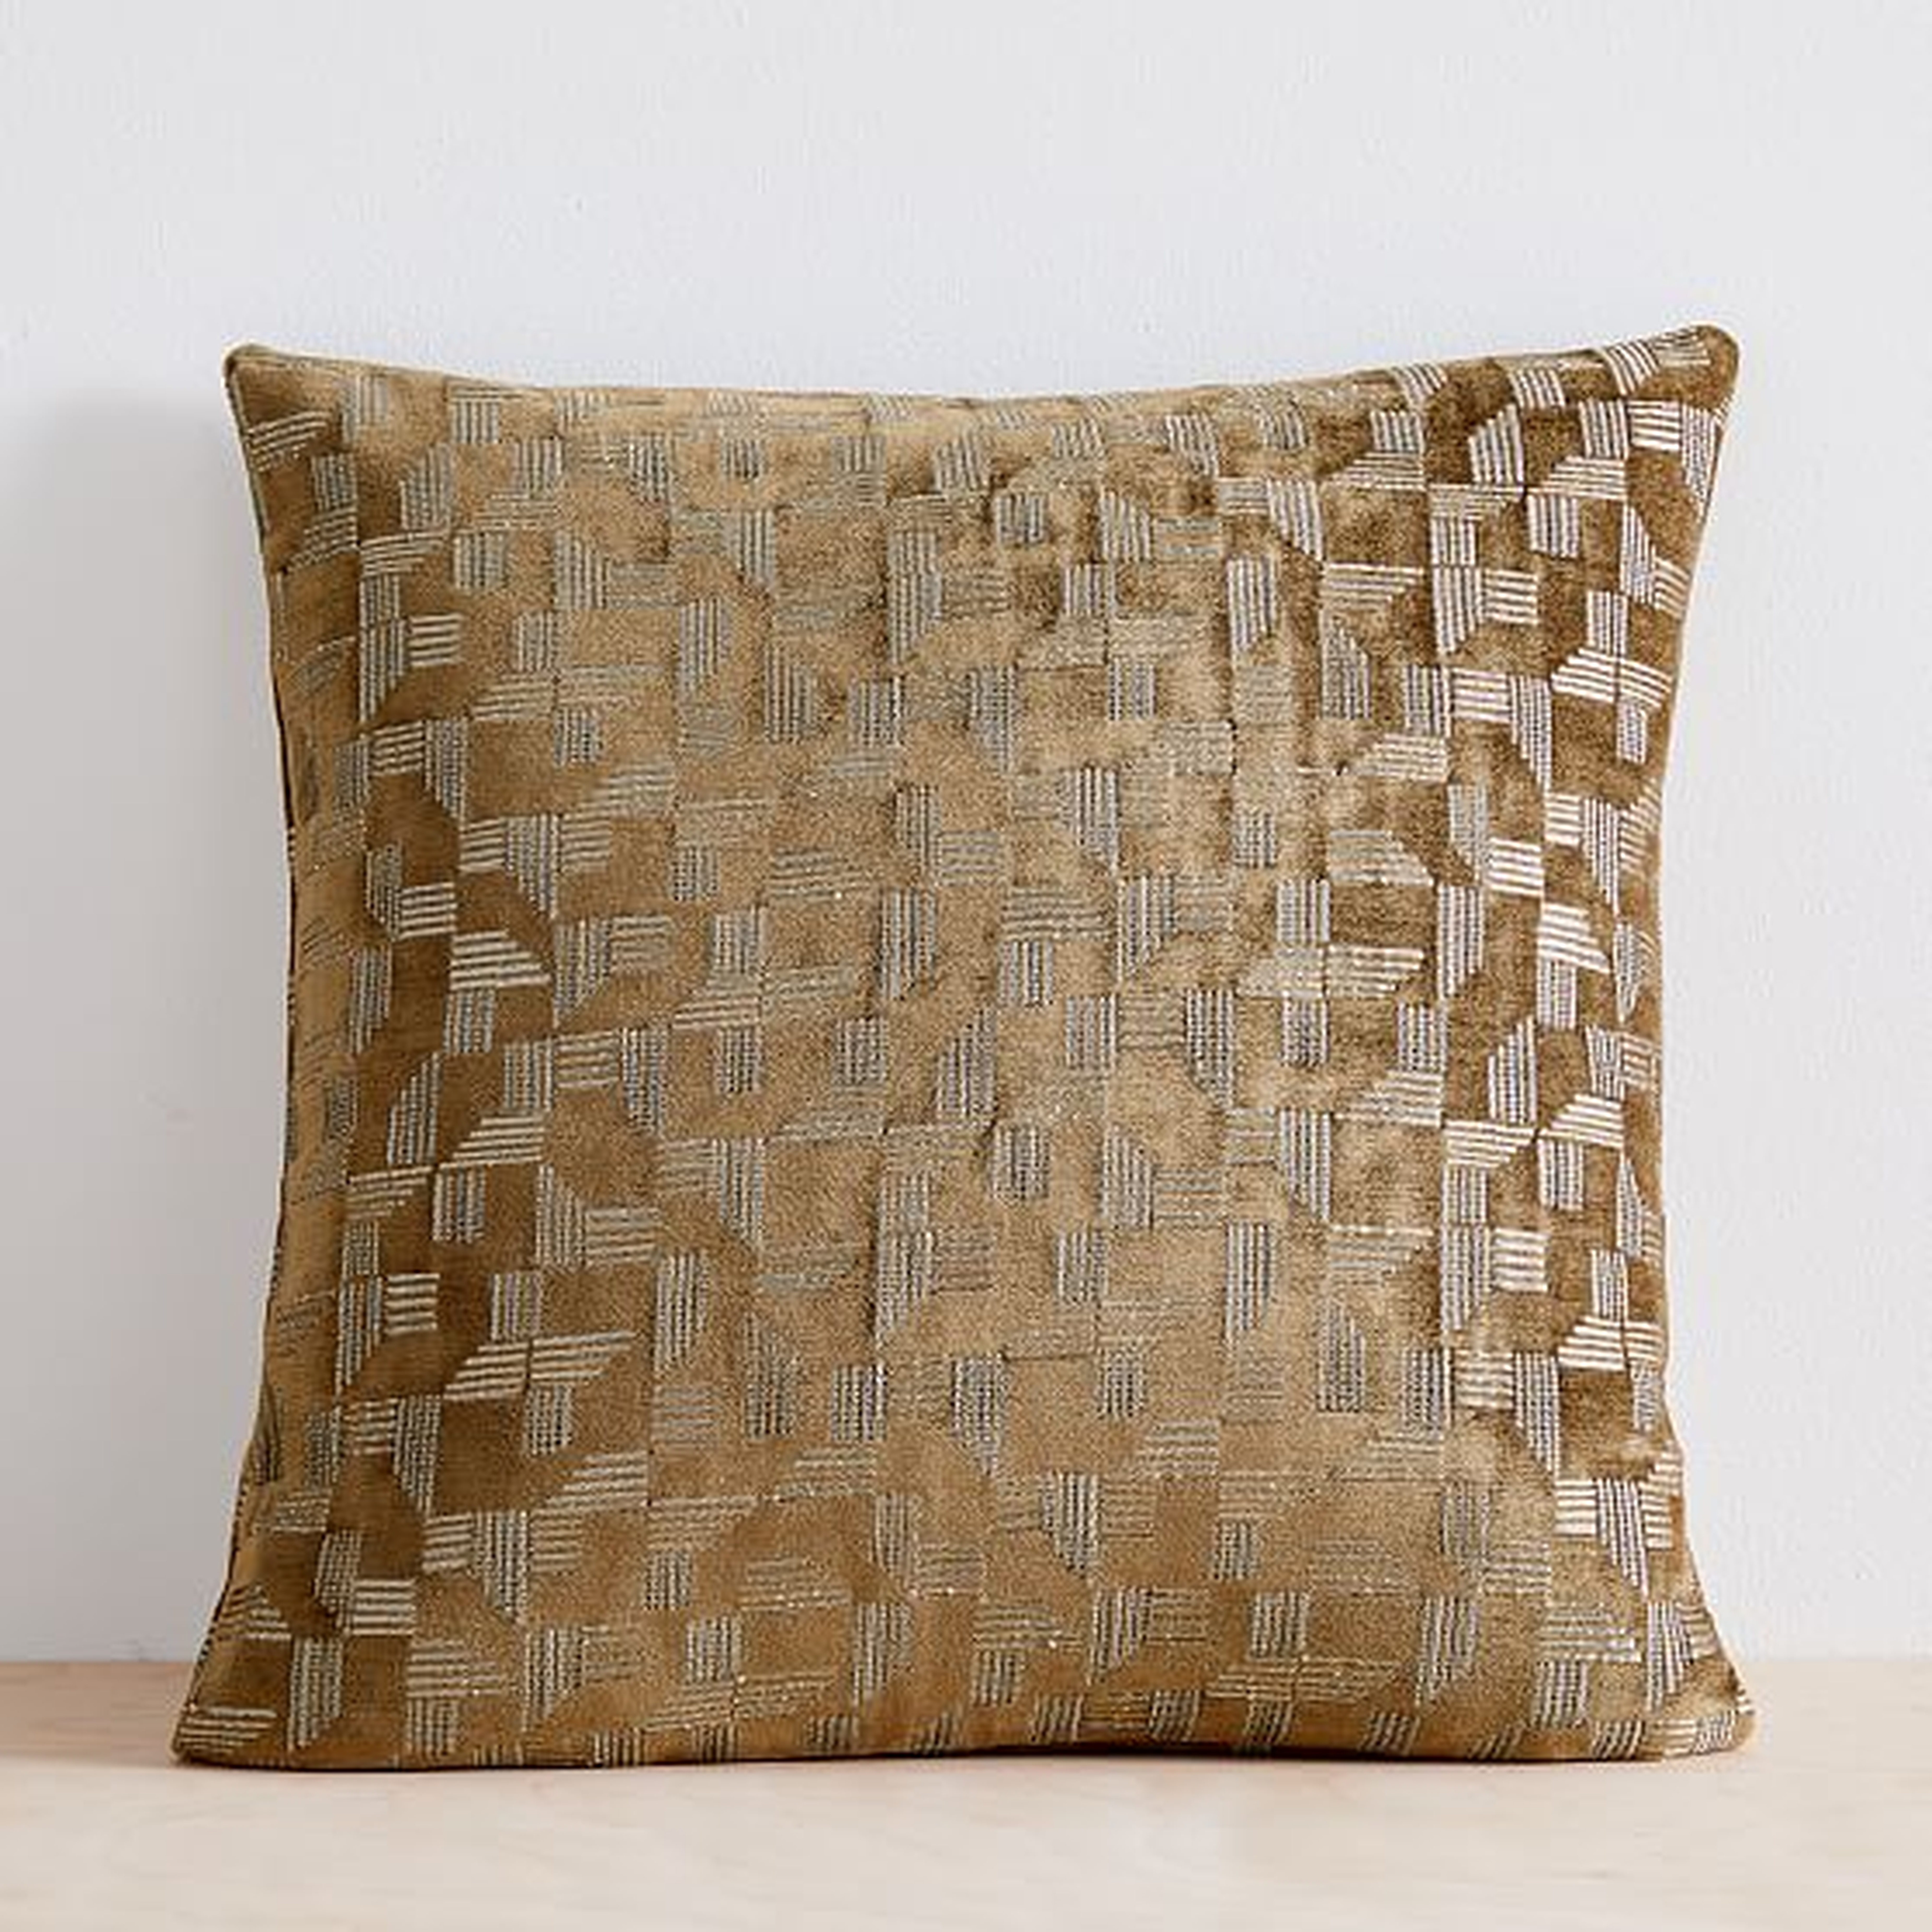 Geo Chenille Jacquard Pillow Cover, 20"x20", Camo Olive - West Elm